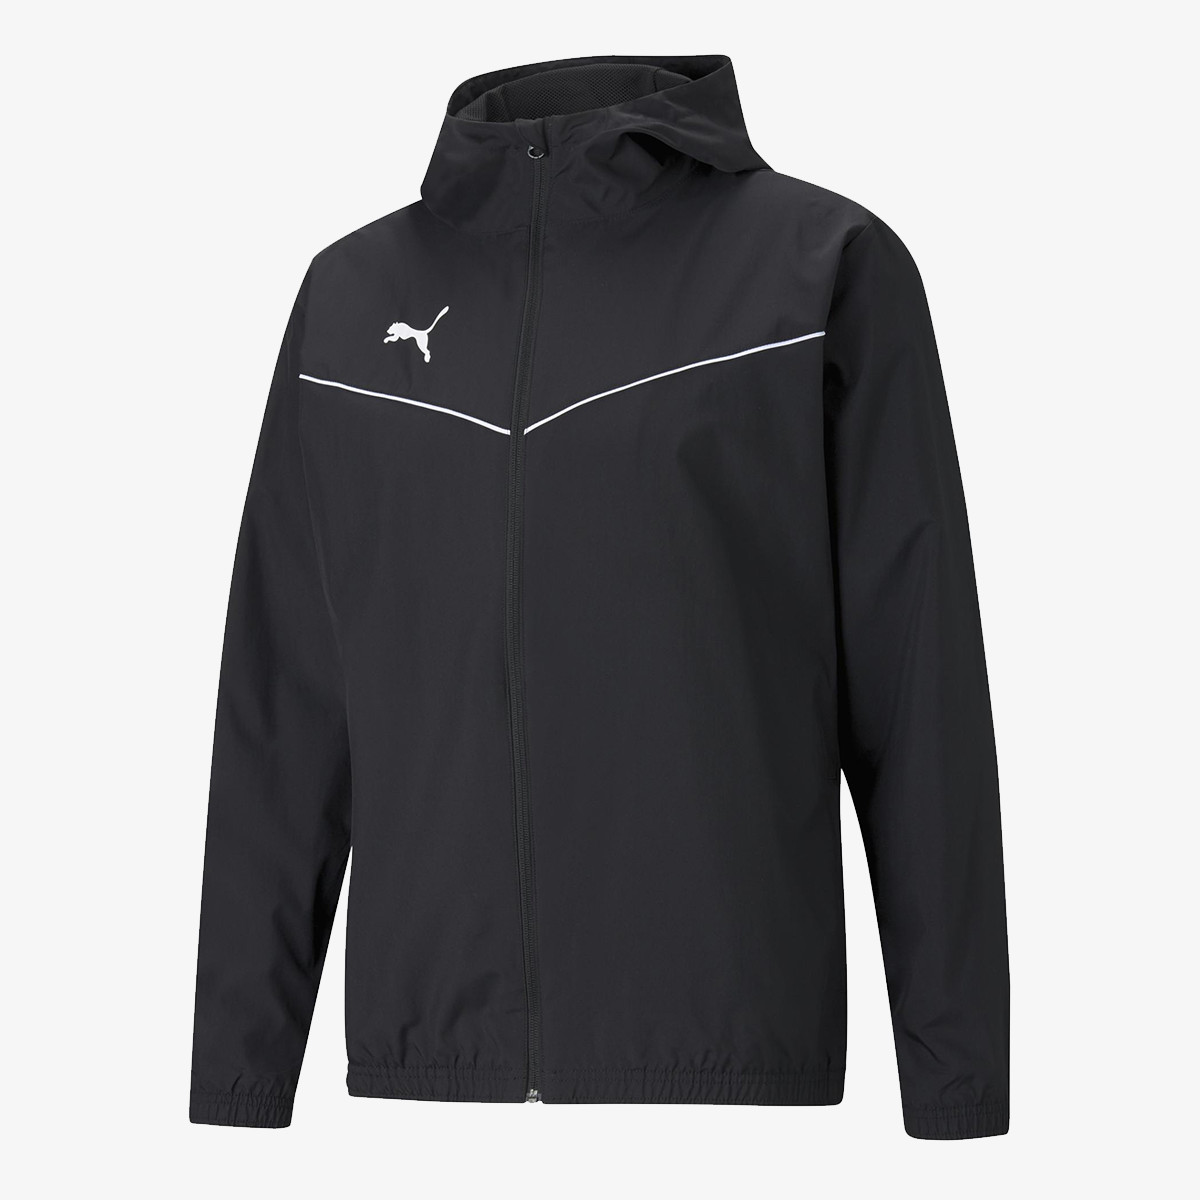 TEAMRISE ALL WEATHER JACKET 